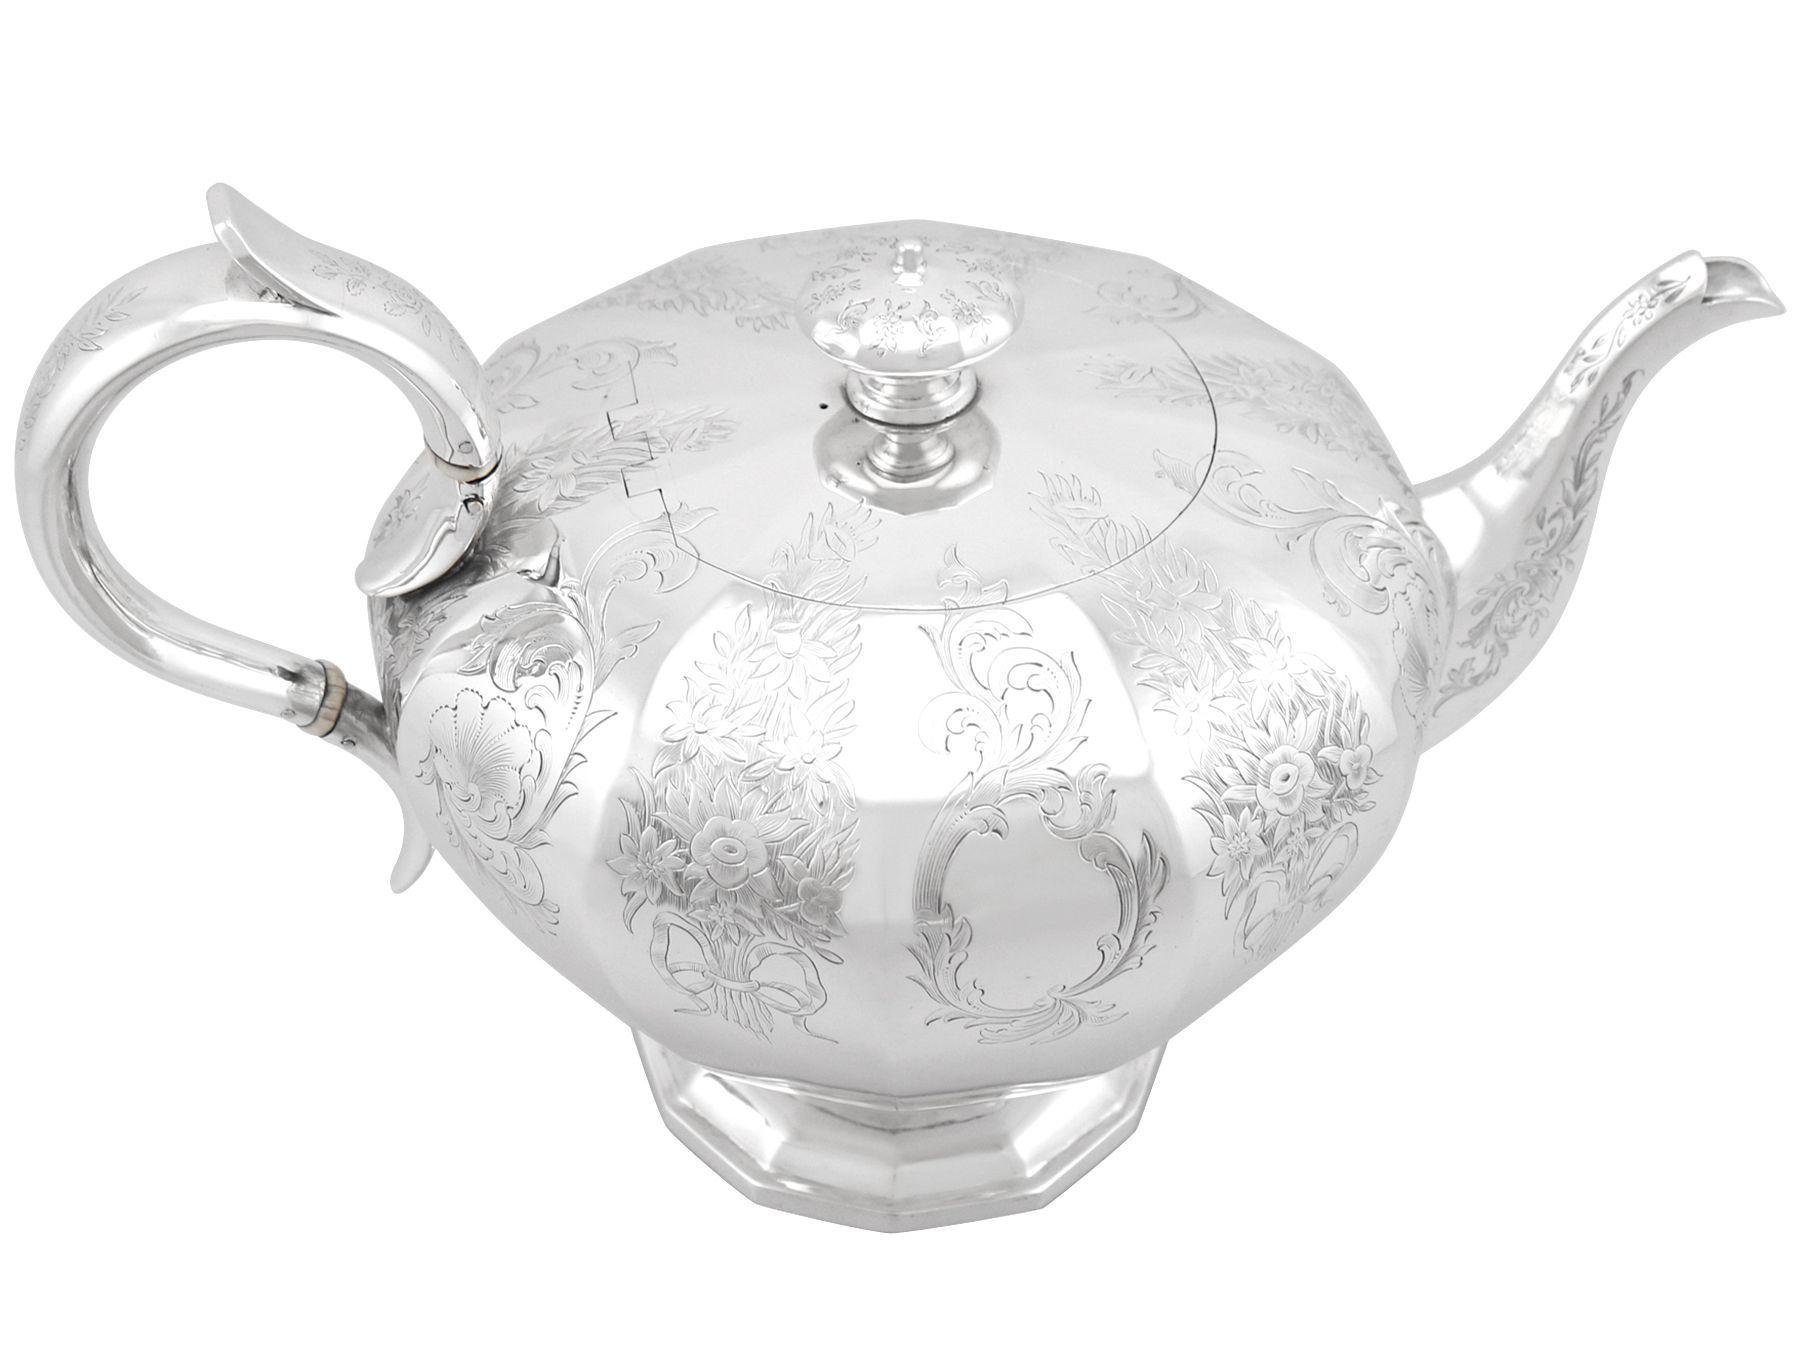 An exceptional, fine and impressive, large antique Victorian English sterling silver teapot made by Charles Riley & George Storer; an addition to our silver teaware collection.

This impressive antique Victorian sterling silver teapot has a